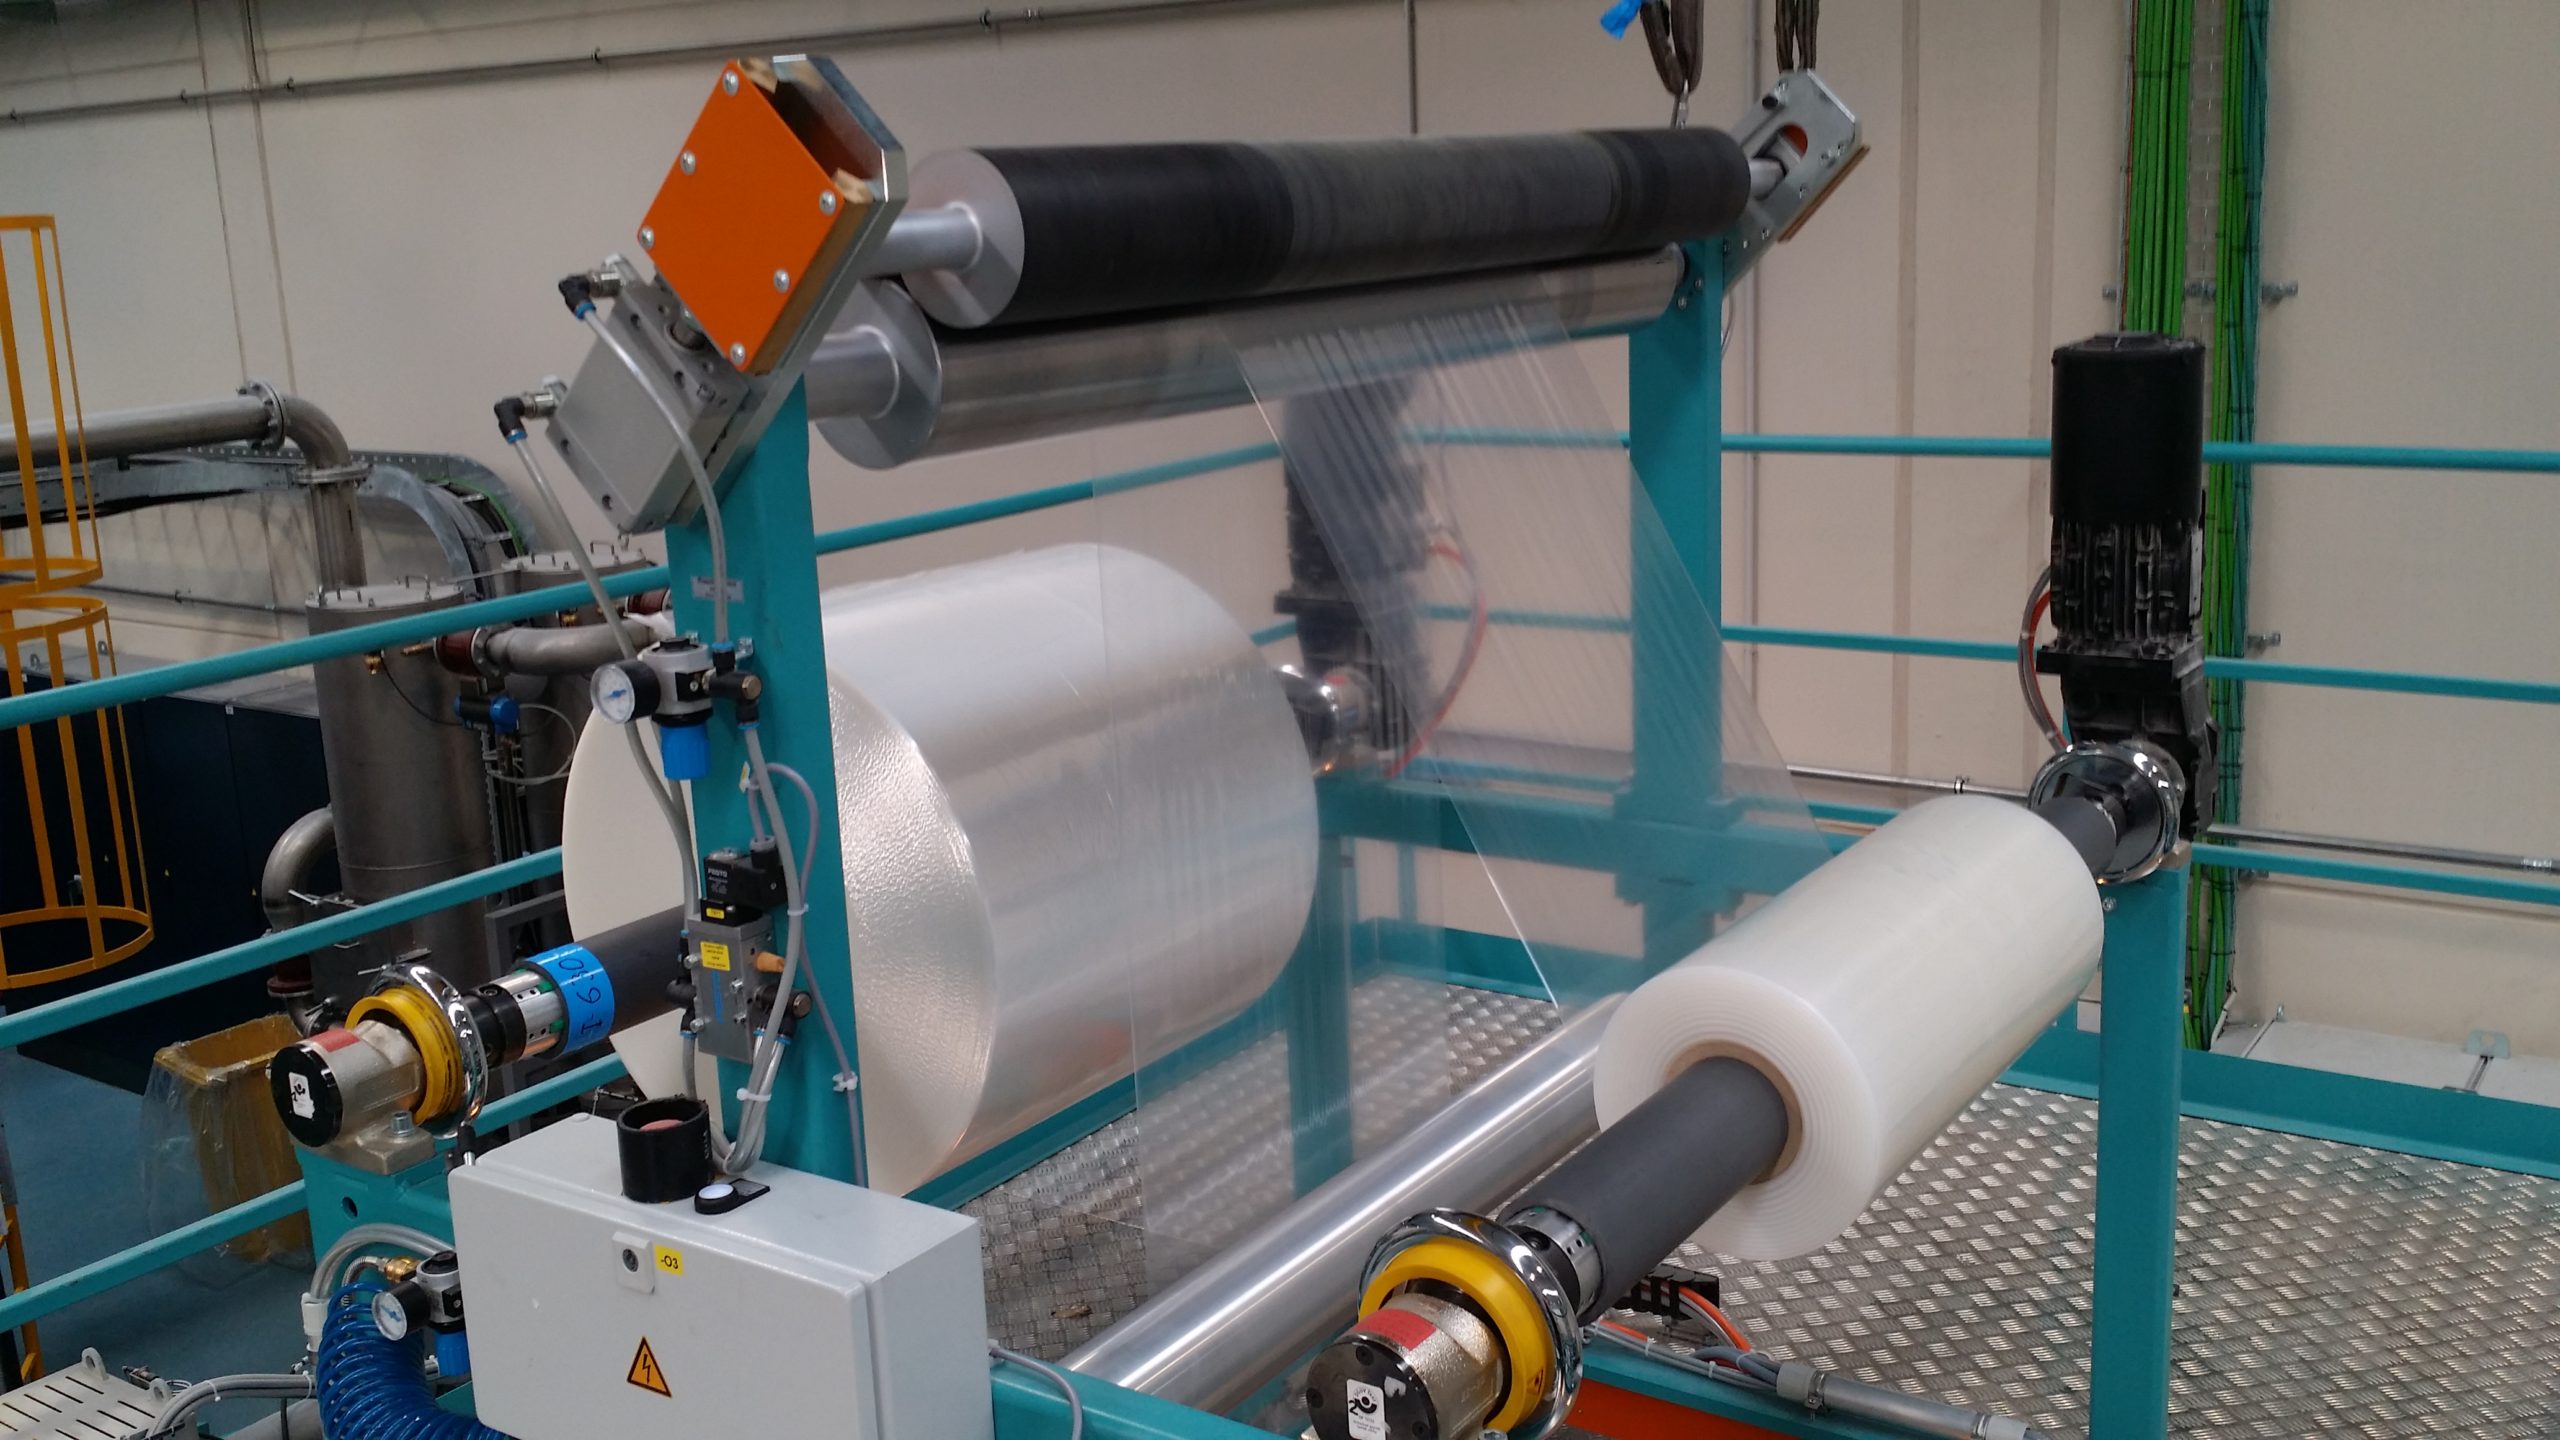 Extrusion coating lamination machine including a rubber roller for pressure and a metal roller for cooling and smoothing.